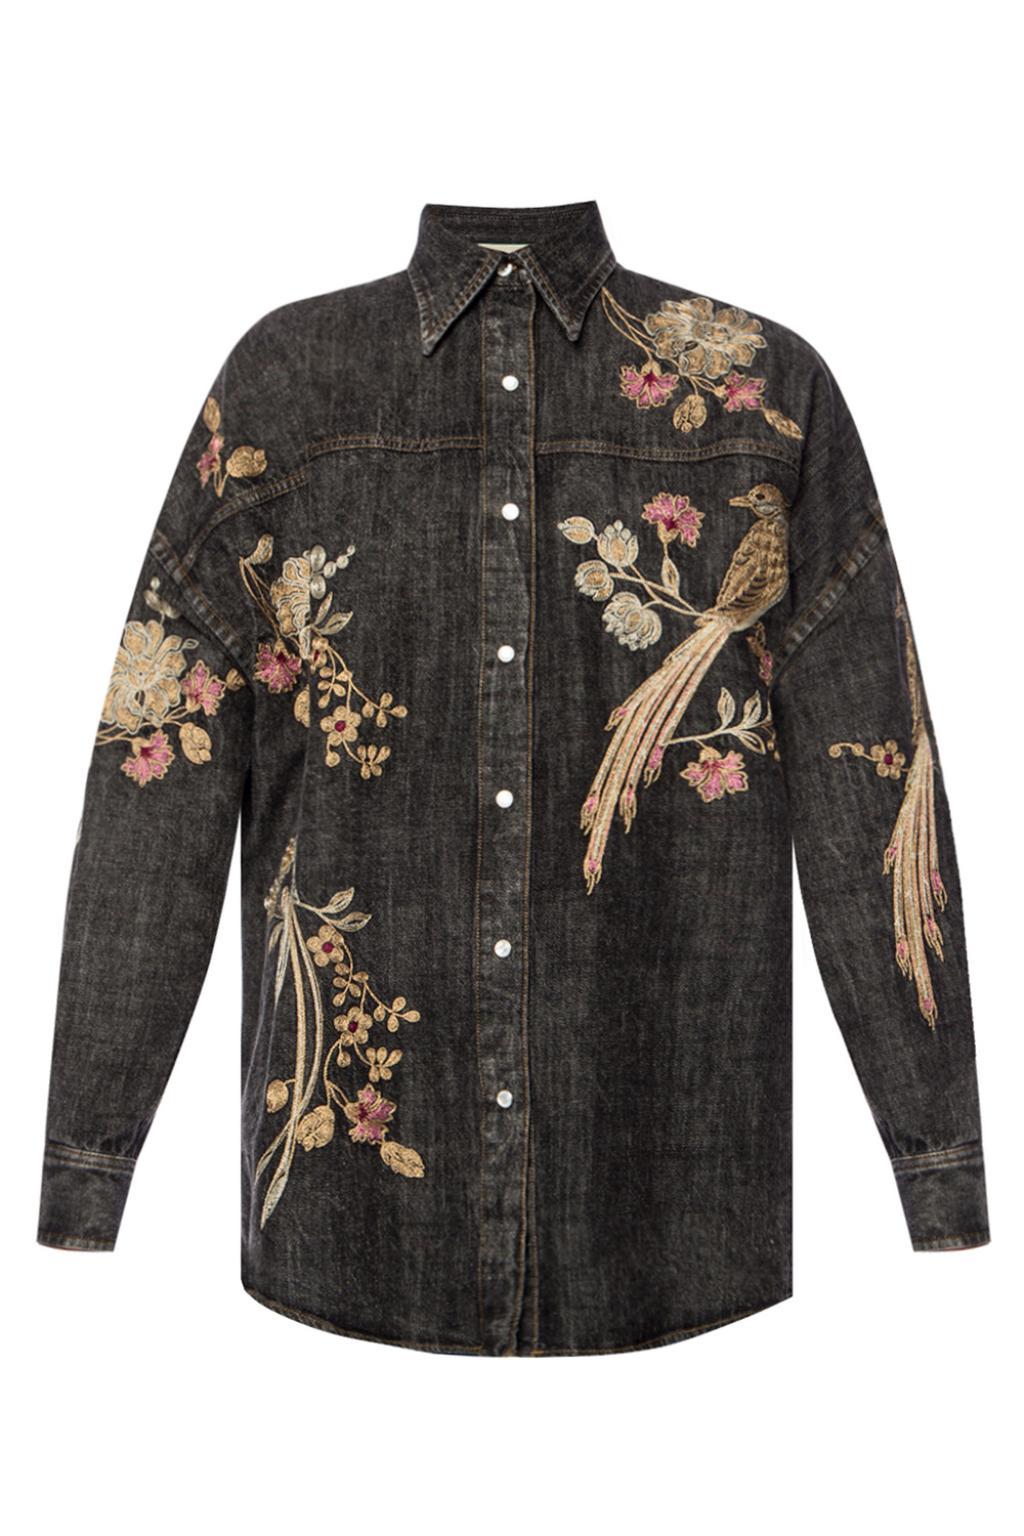 Lyst - Gucci Denim Shirt With An Embroidered Pattern in Gray